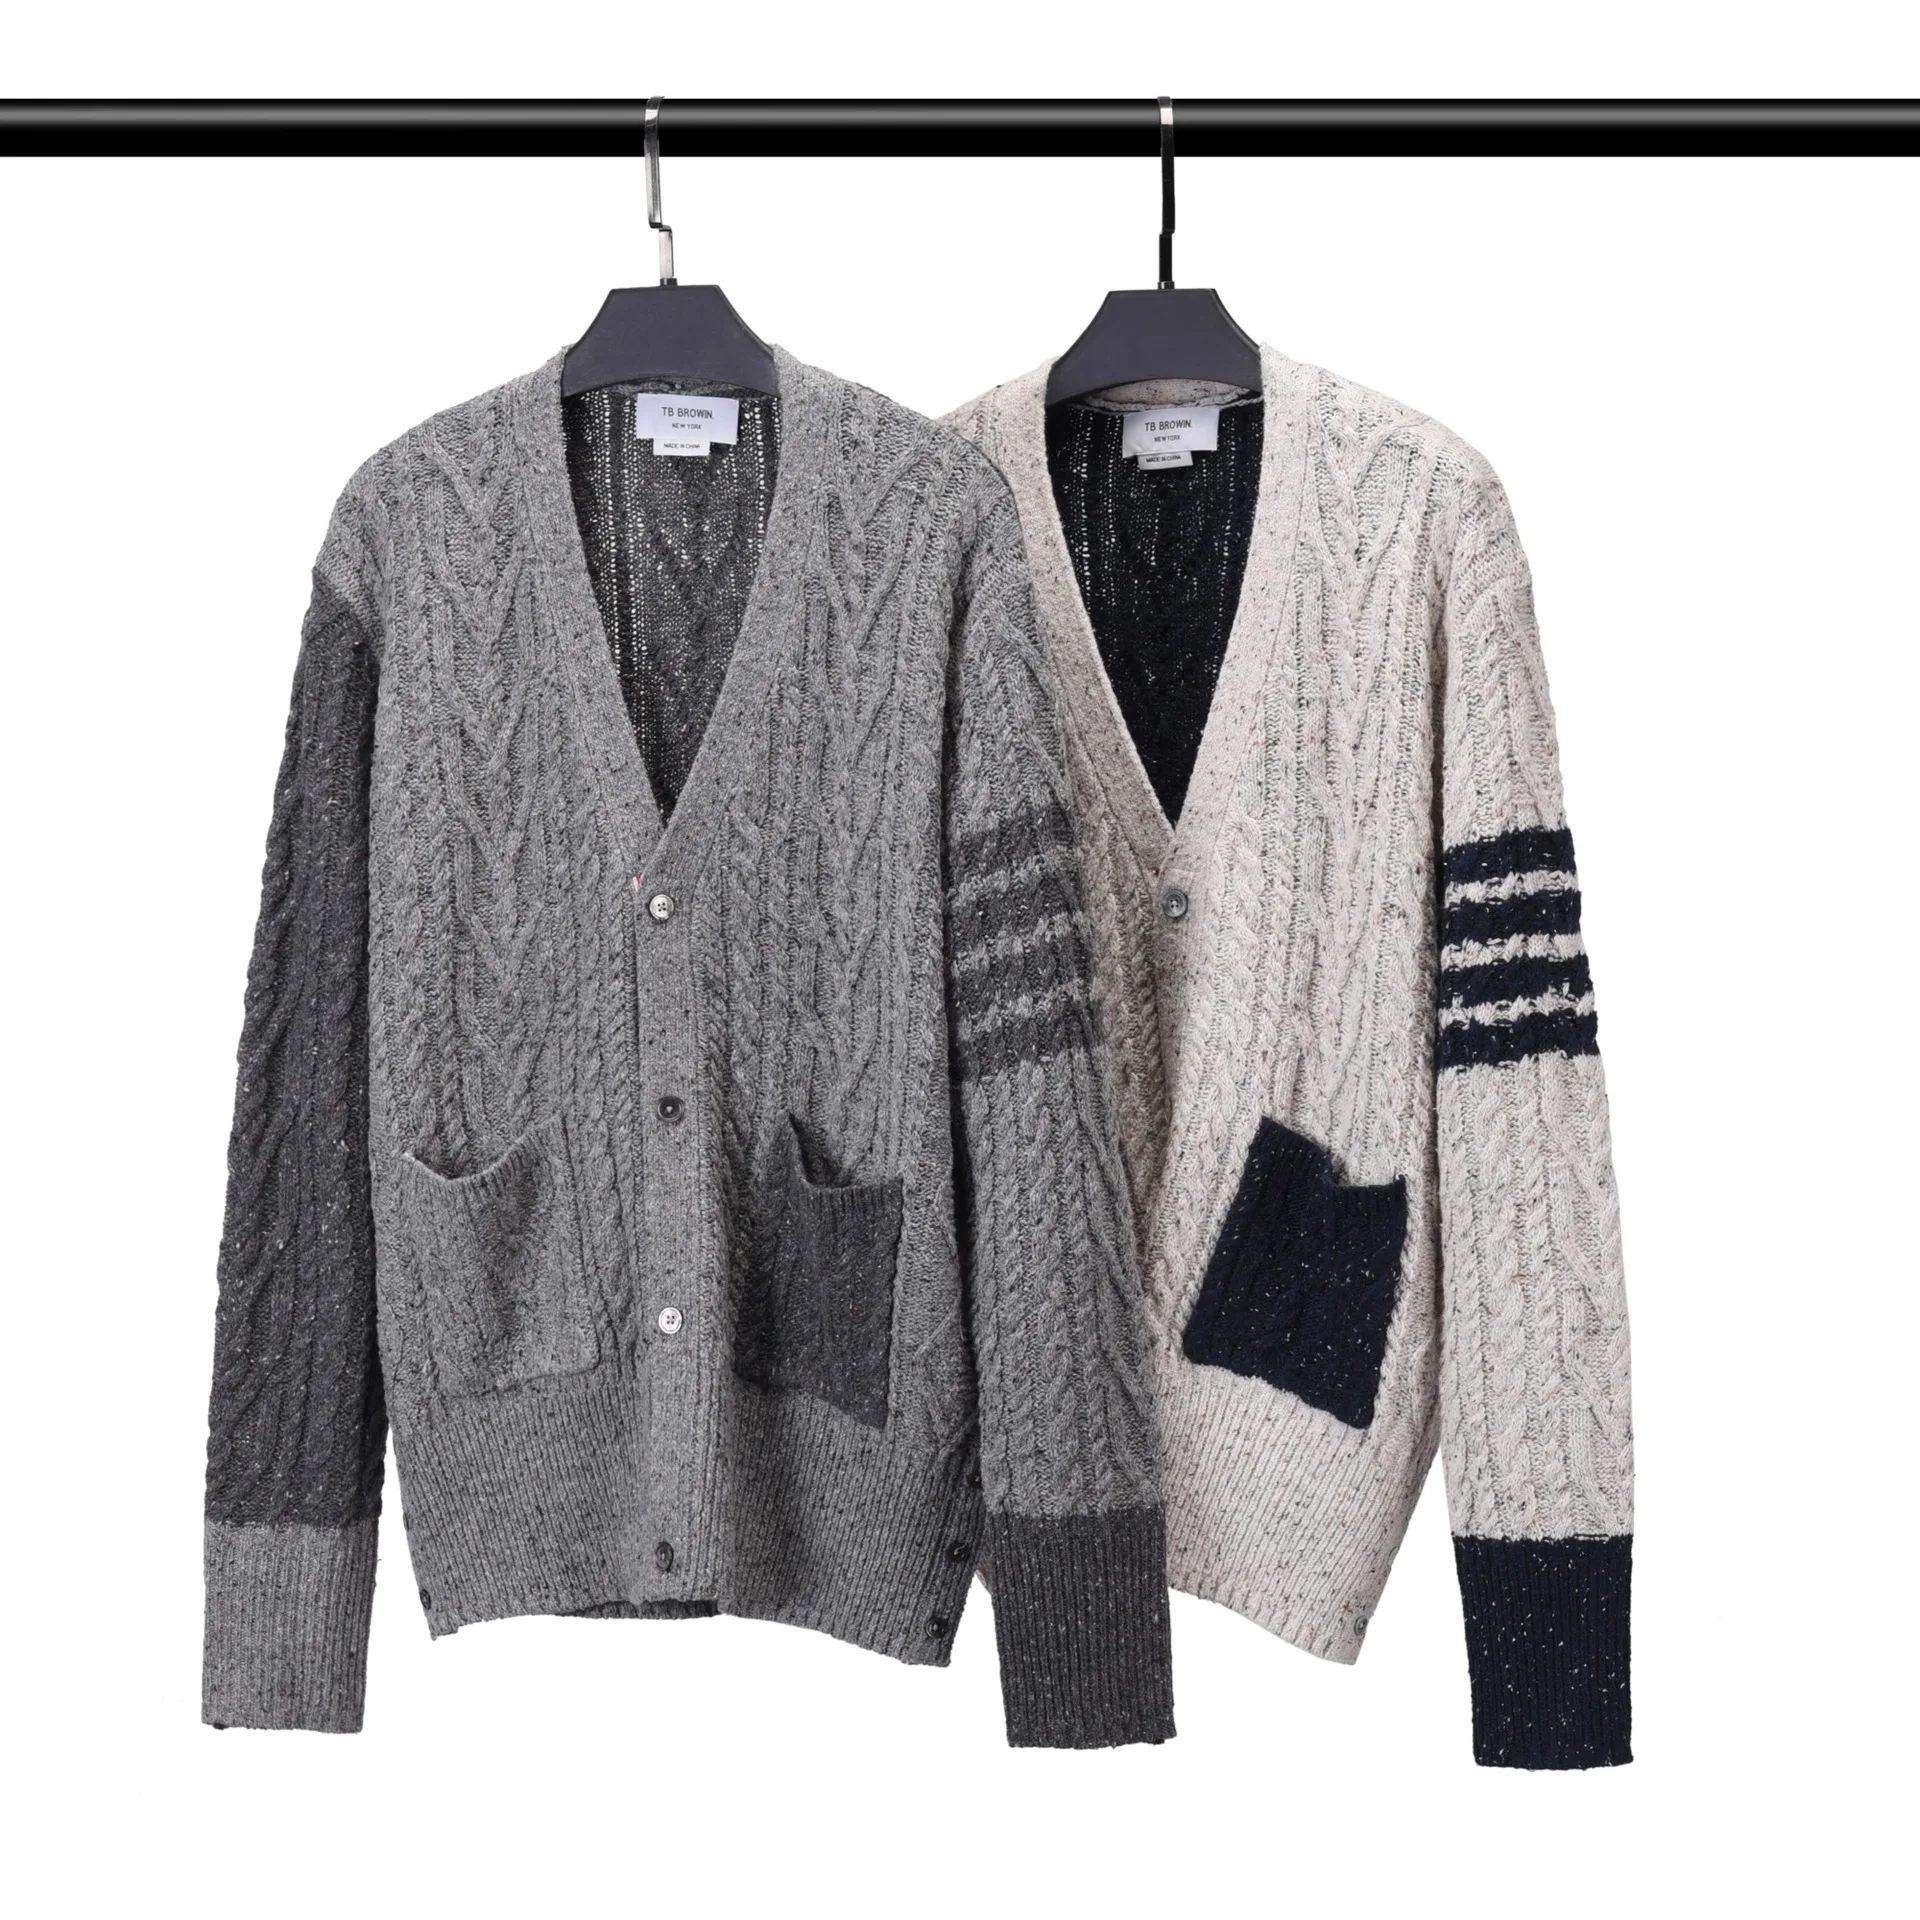 THOM BRUN's new wool V-neck cardigan TB Men's and women's Korean casual sweater with four bars